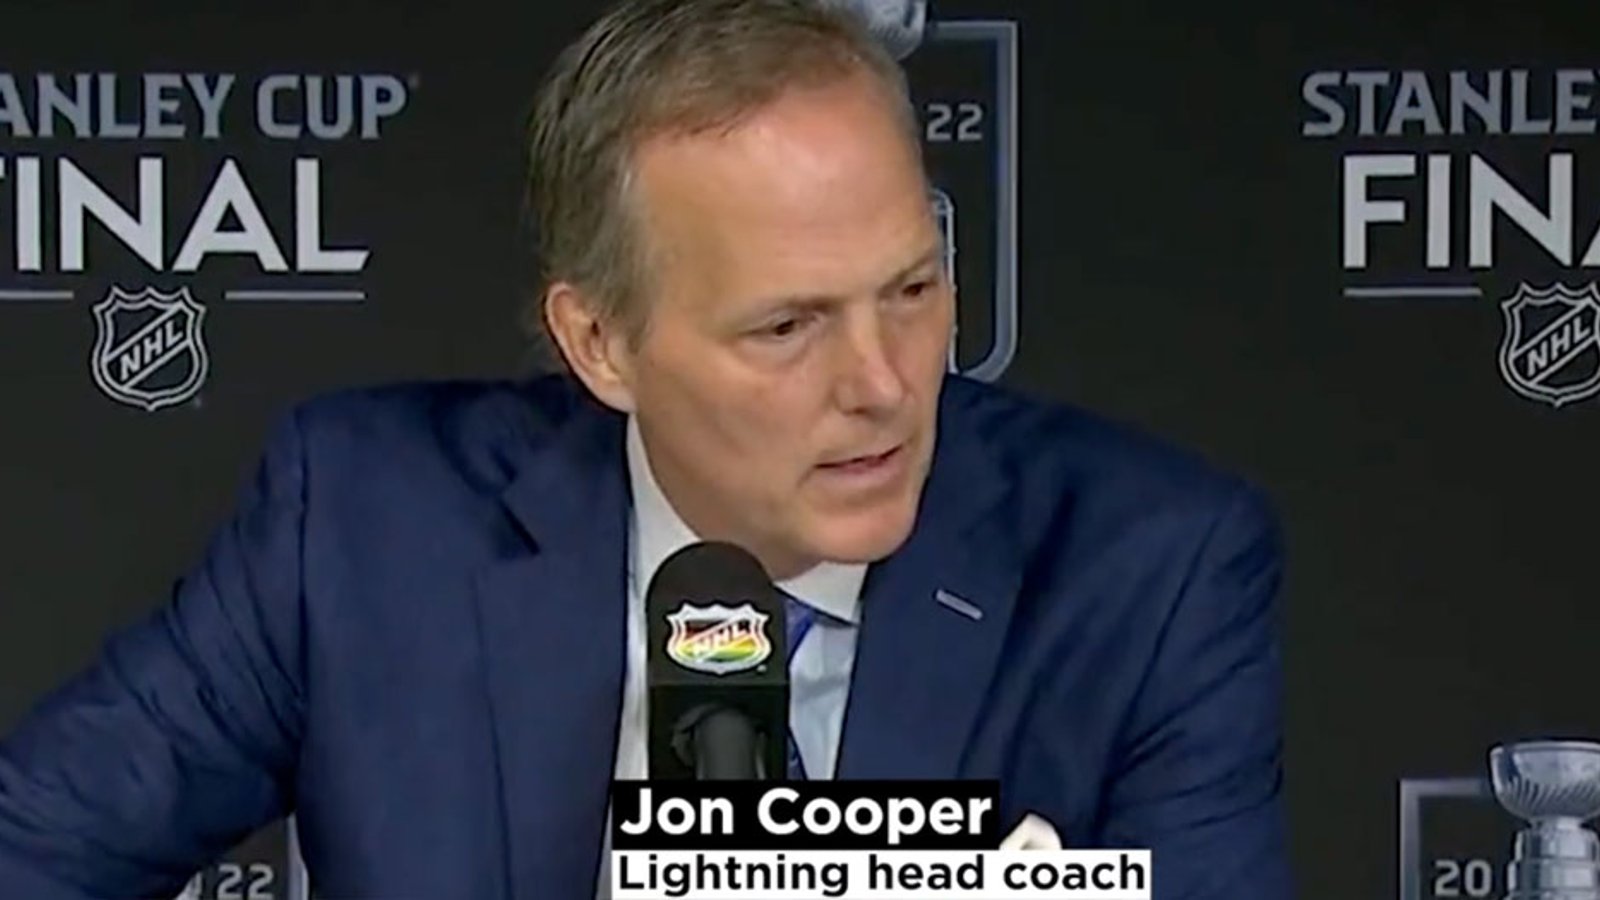 Coach Cooper calls out the officials and the NHL after controversial OT goal